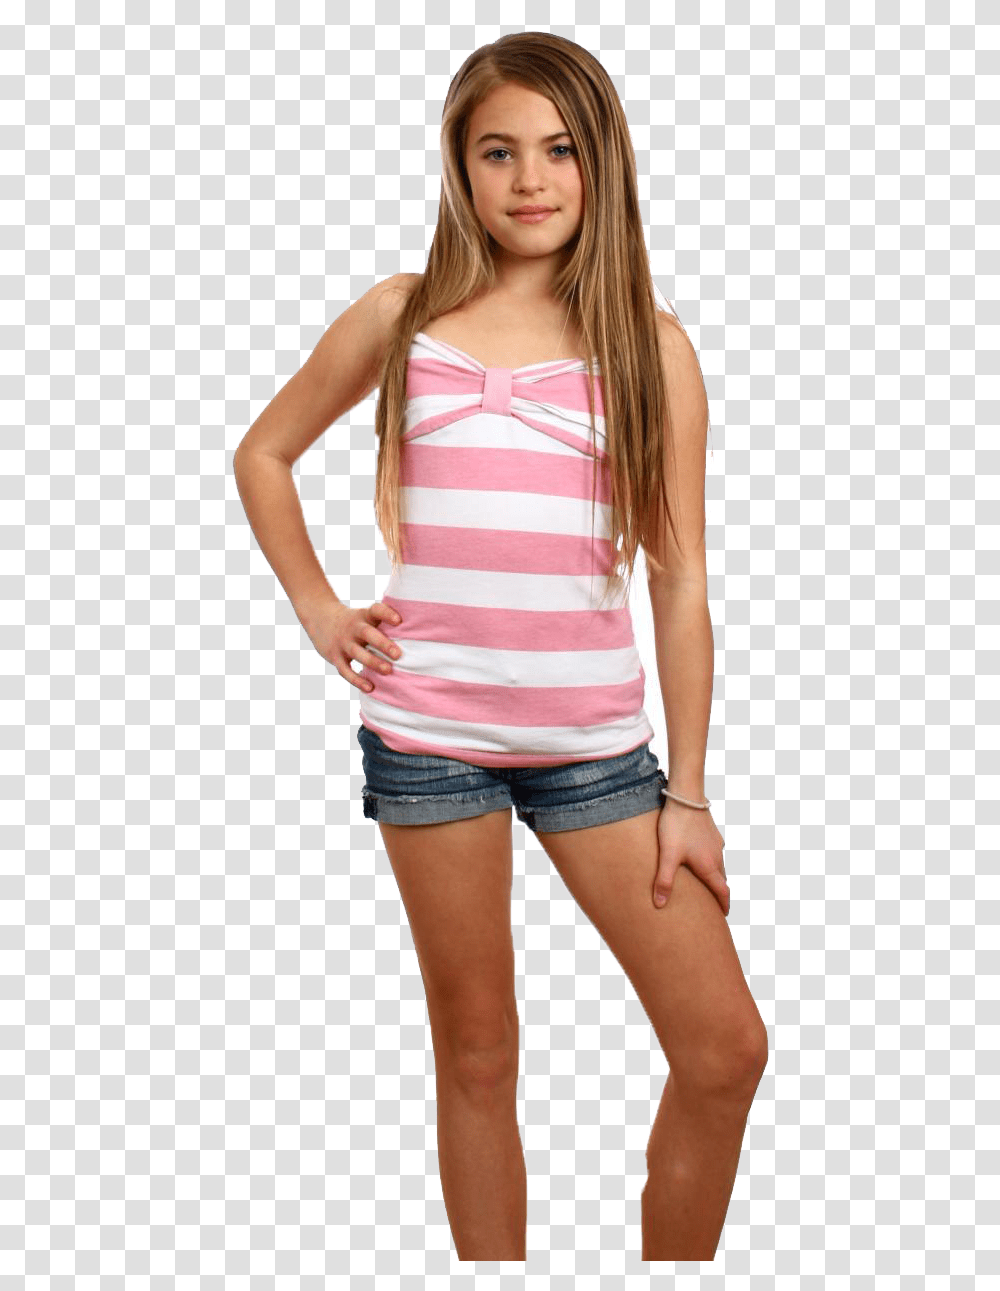 Girls Hd Images Girl, Person, Female, Shorts Transparent Png